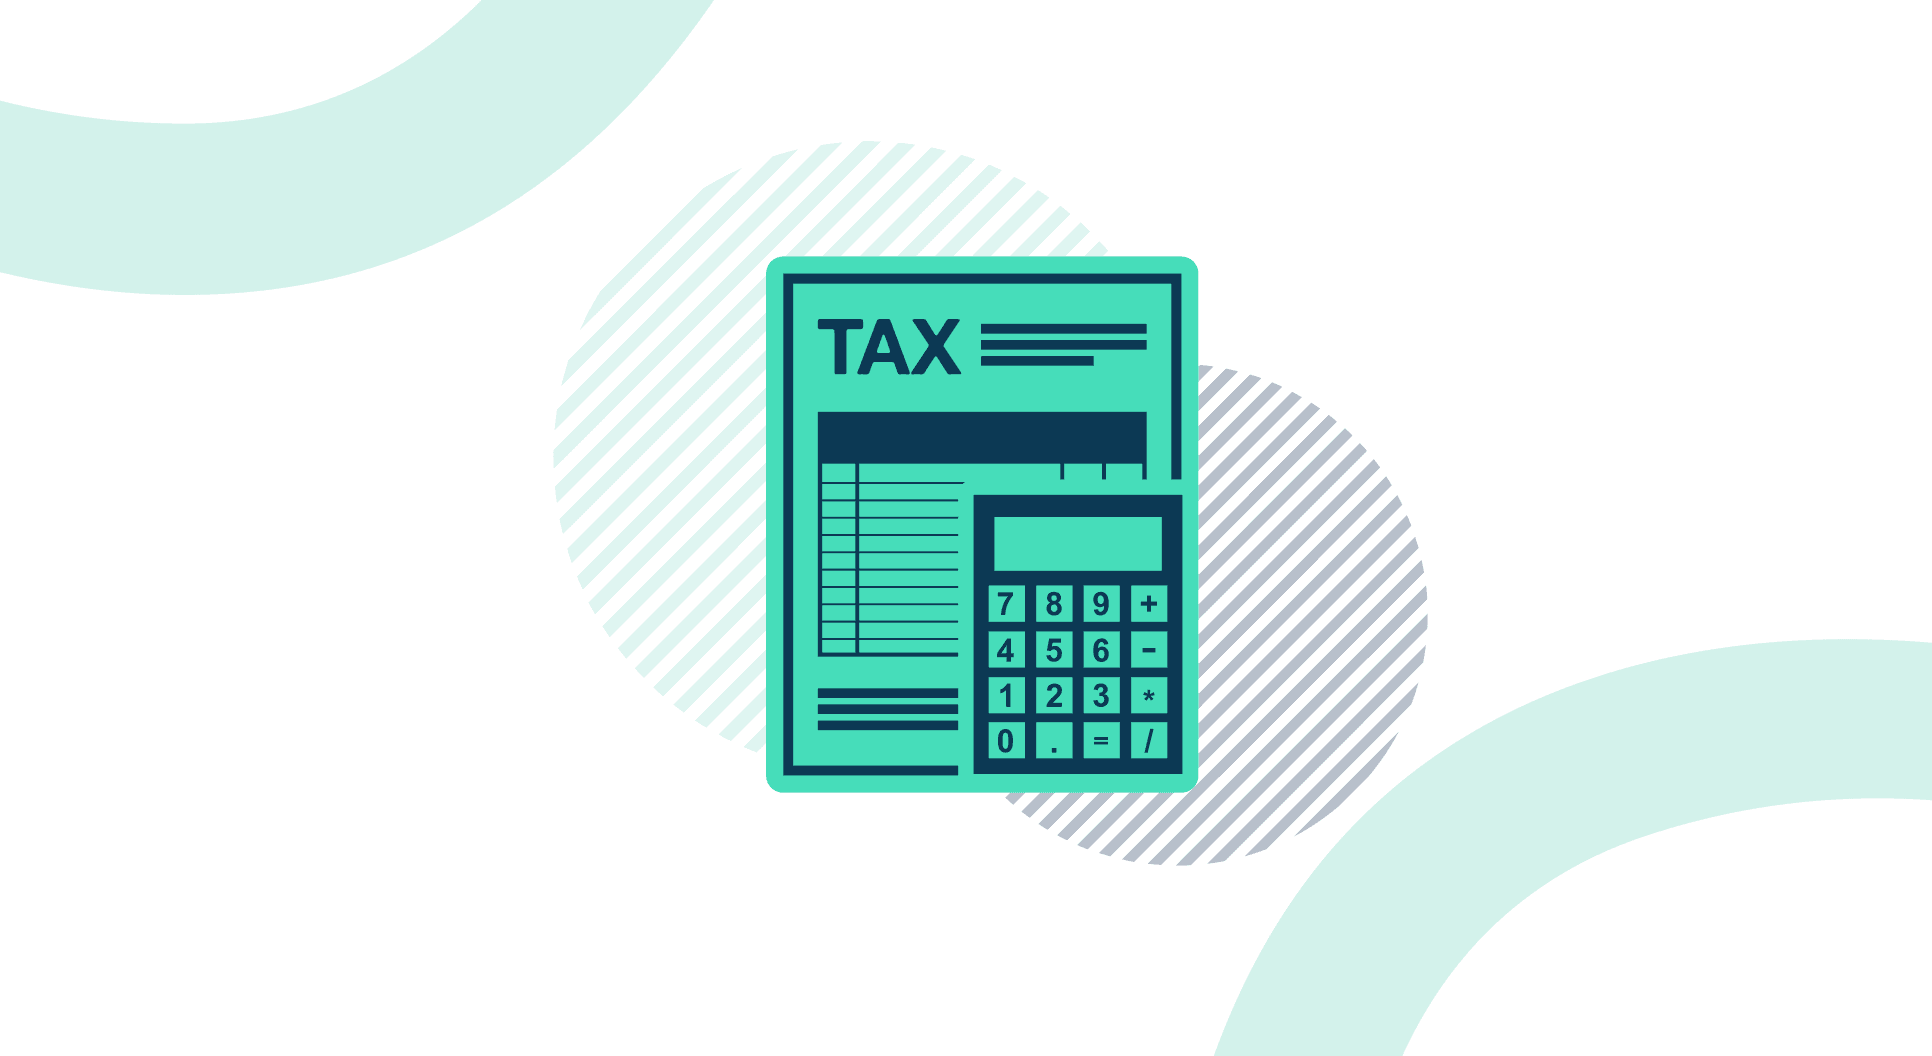 Tax form and calculator